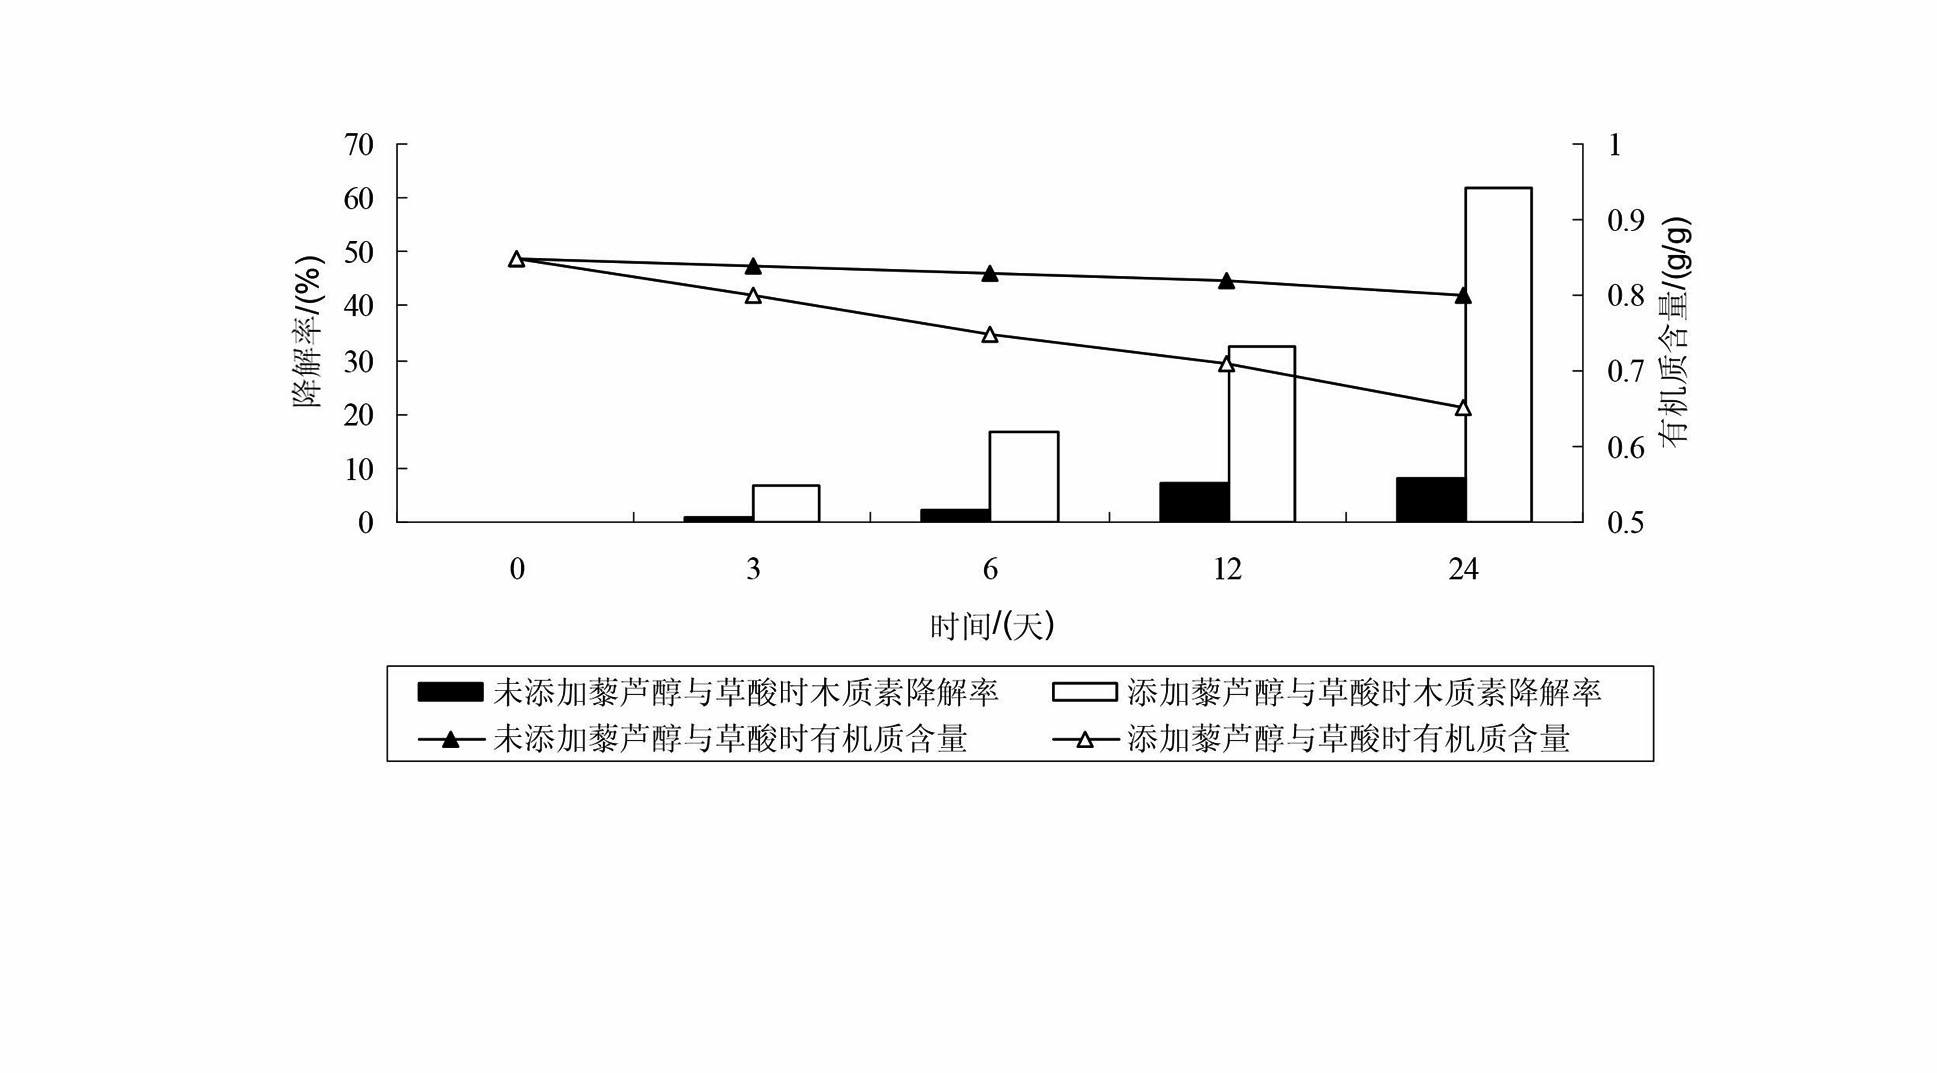 Method for promoting composite enzymes by utilizing resveratrol and oxalic acid to catalytically degrade rice straws